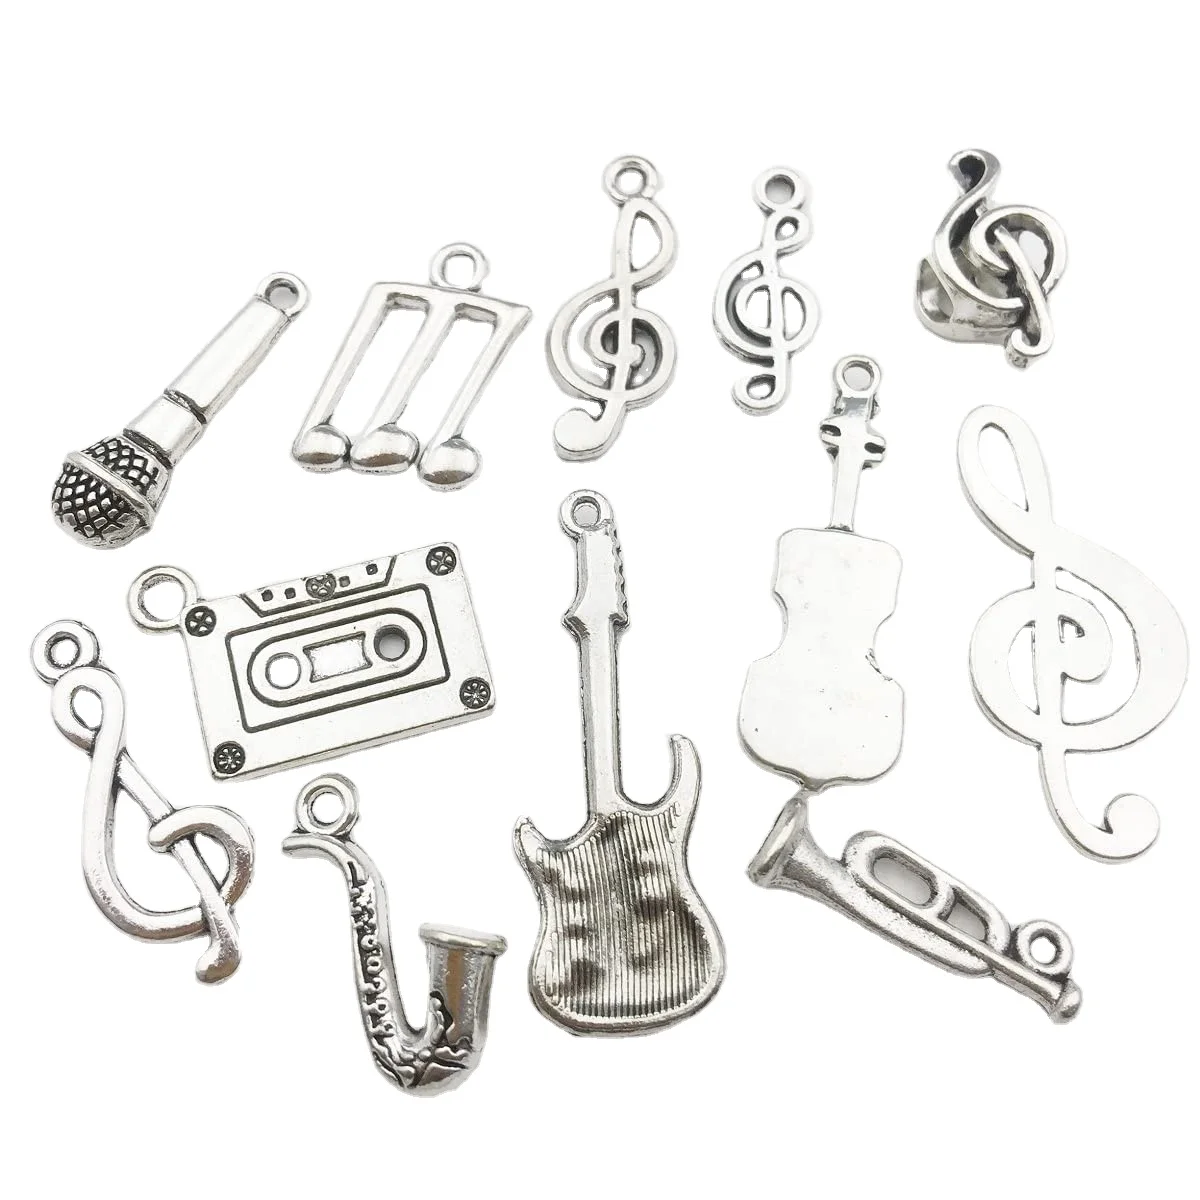 

70PCS Bulk Lots Instrument Music Notes Small Silver Metal Charms Pendants DIY for Jewelry Making Necklace Bracelet and Crafting